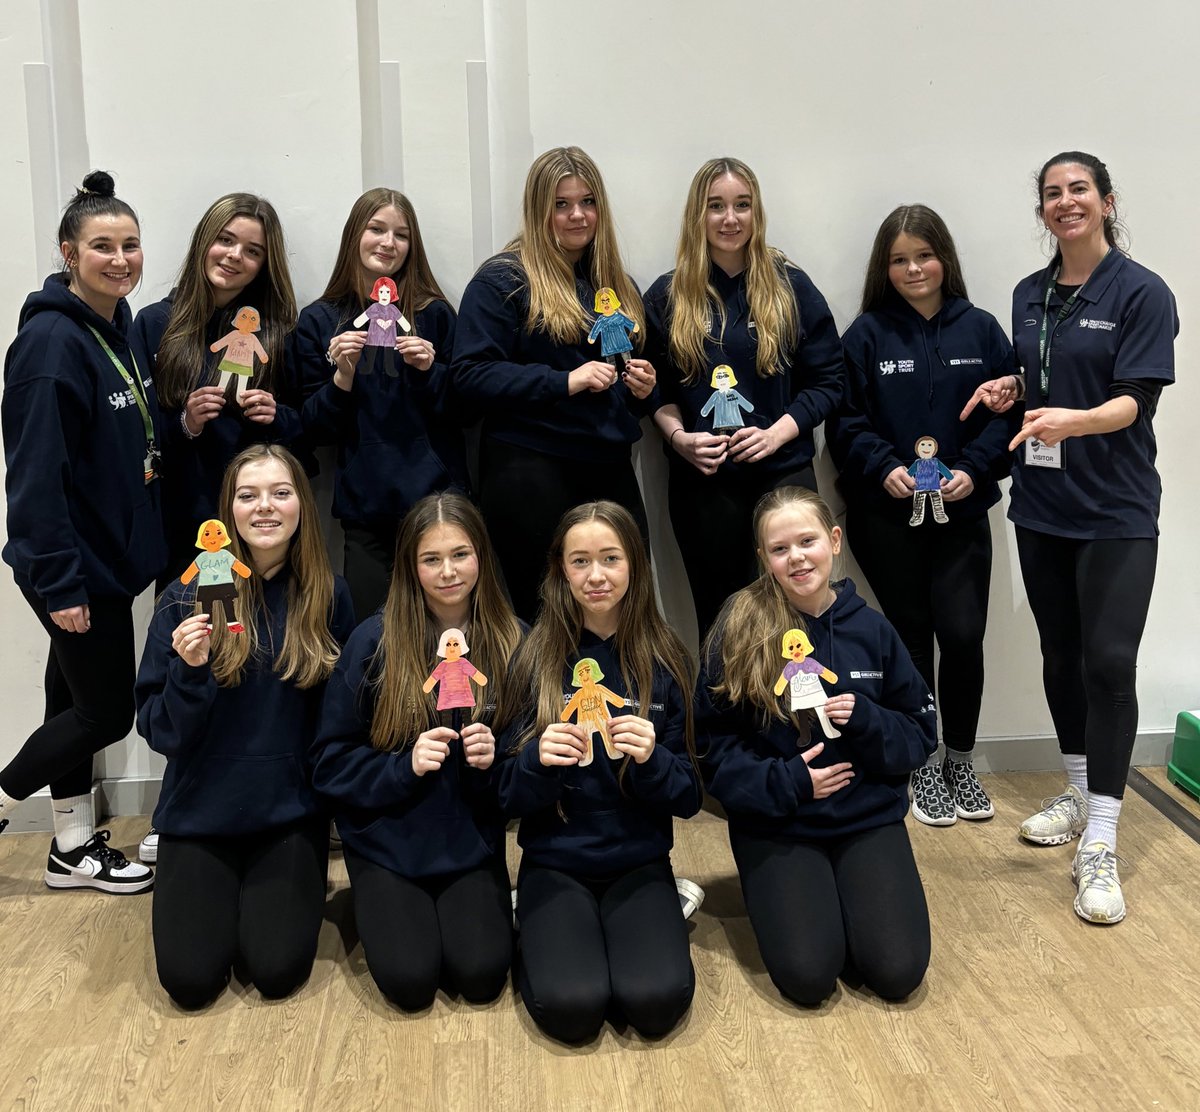 The @BedlingtonAcad GLAMs and their mini GLAMs! 💁‍♀️ Thanks so much for a brilliant afternoon. Always a pleasure to spend time with inspirational girls making positive change in their school! #GirlsActive @YouthSportTrust